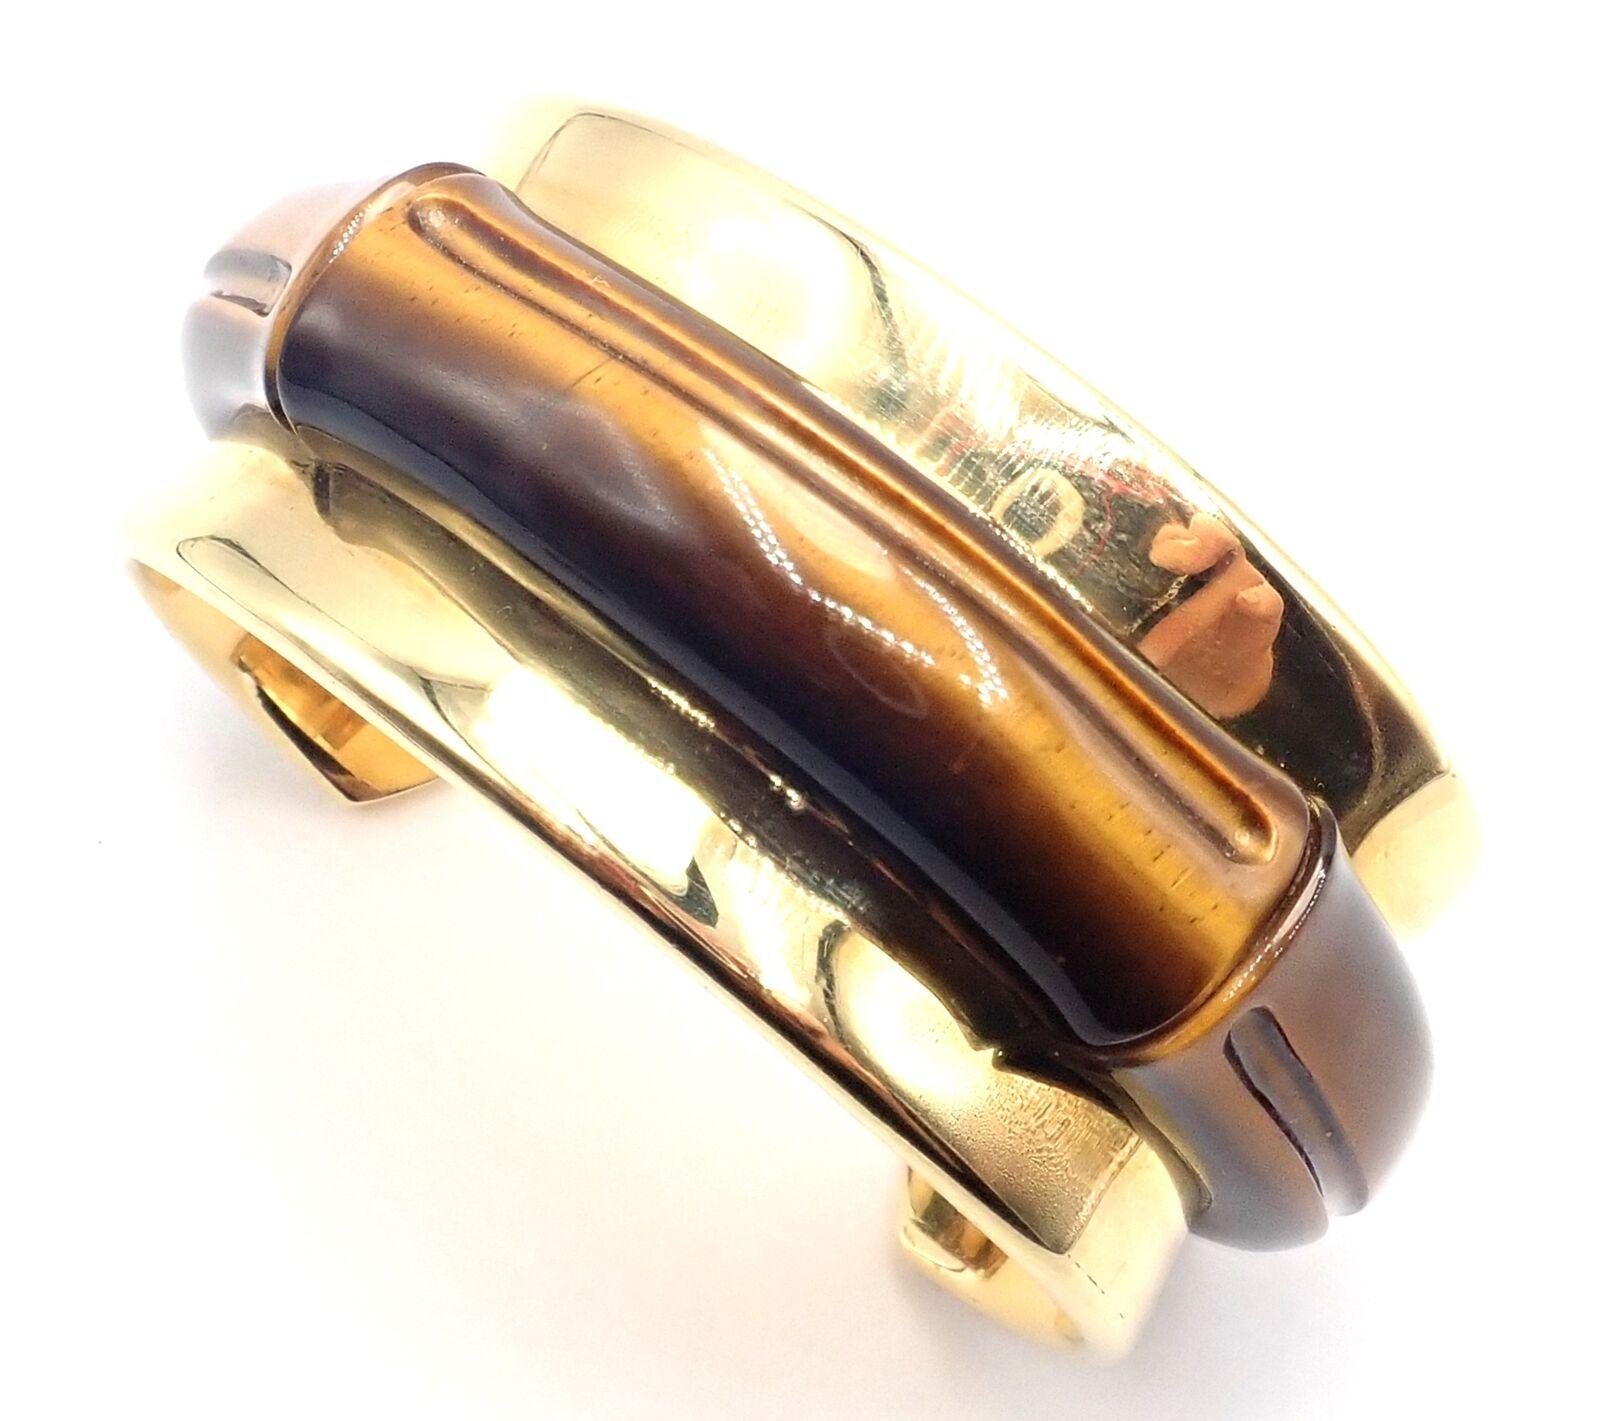 18k Yellow Gold Tiger's Eye Cuff Bangle Bracelet from Tiffany & Co 2002.
With Tiger eye Stone.
Details: 
Weight: 87.4 grams
Length: 7